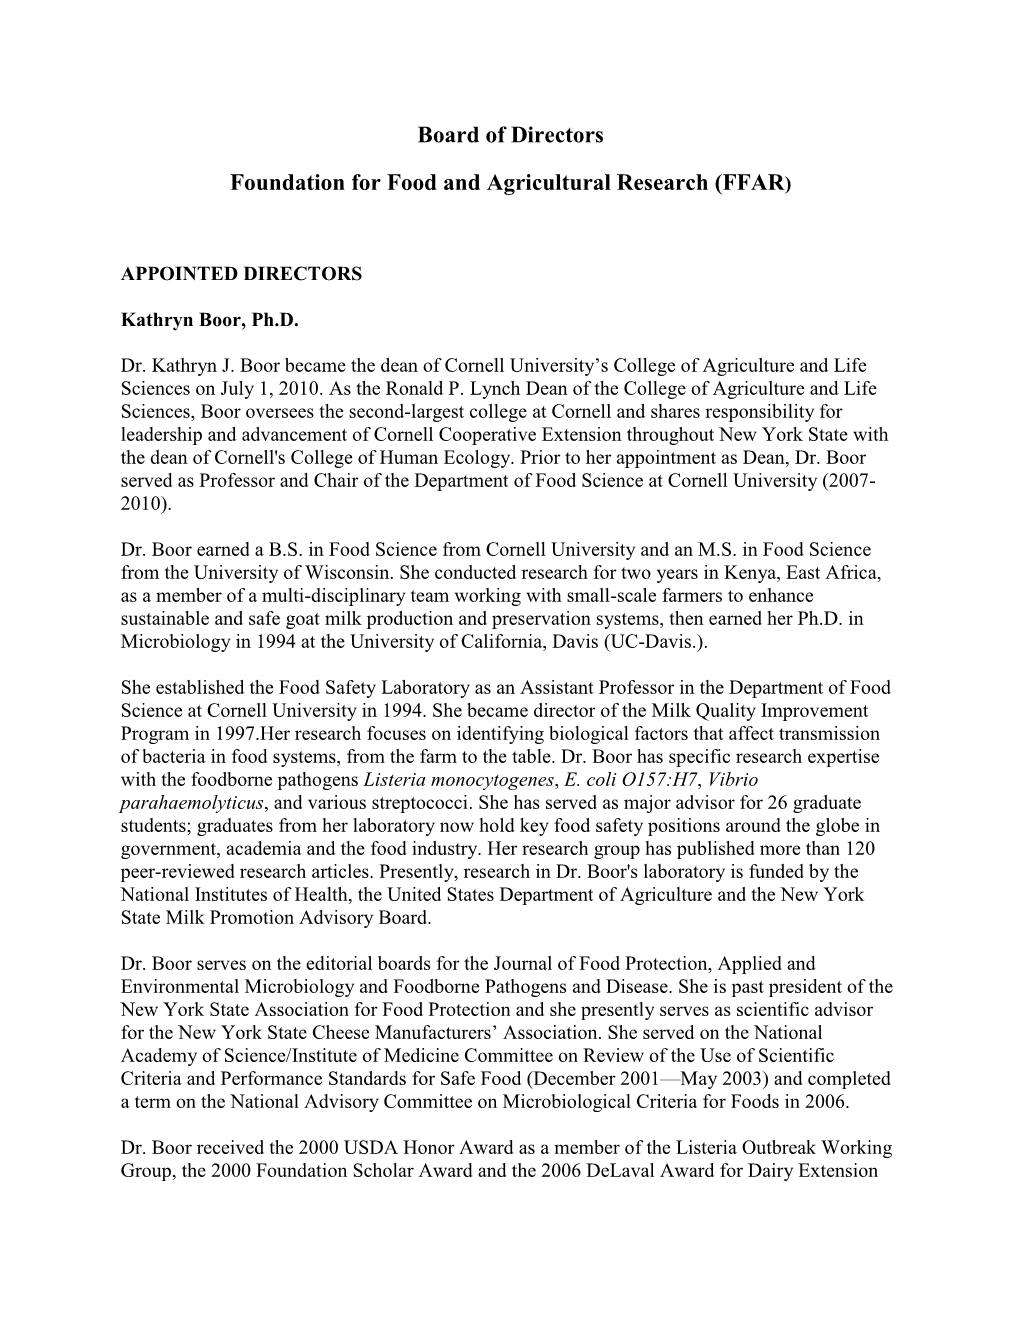 Board of Directors Foundation for Food and Agricultural Research